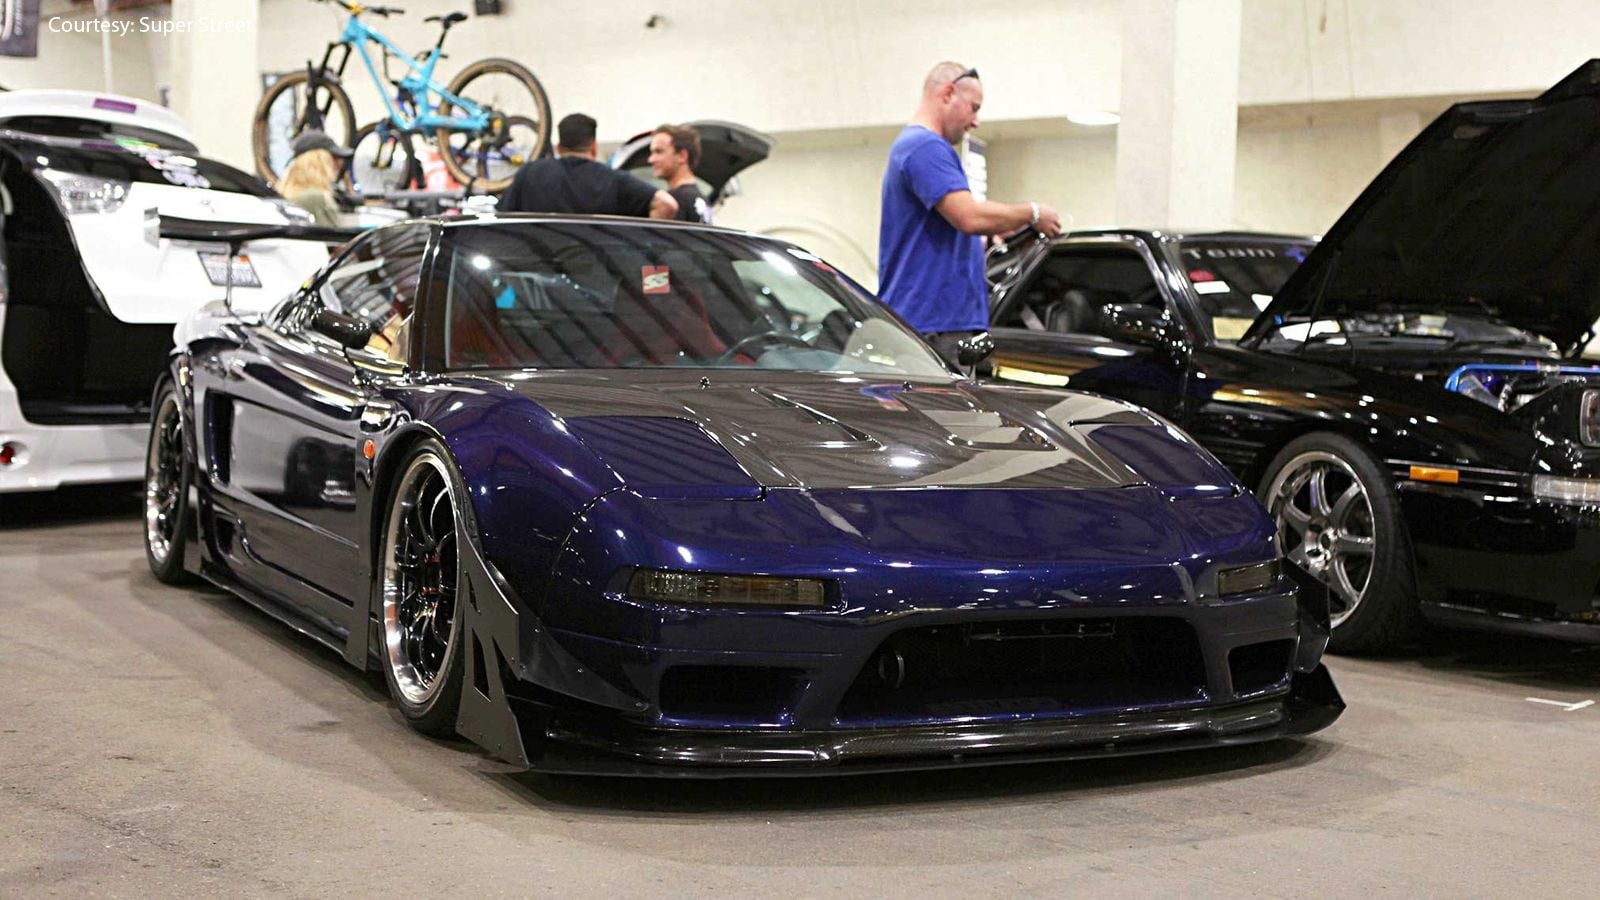 Daily Slideshow: This 605WHP SK2 Is Track Ready